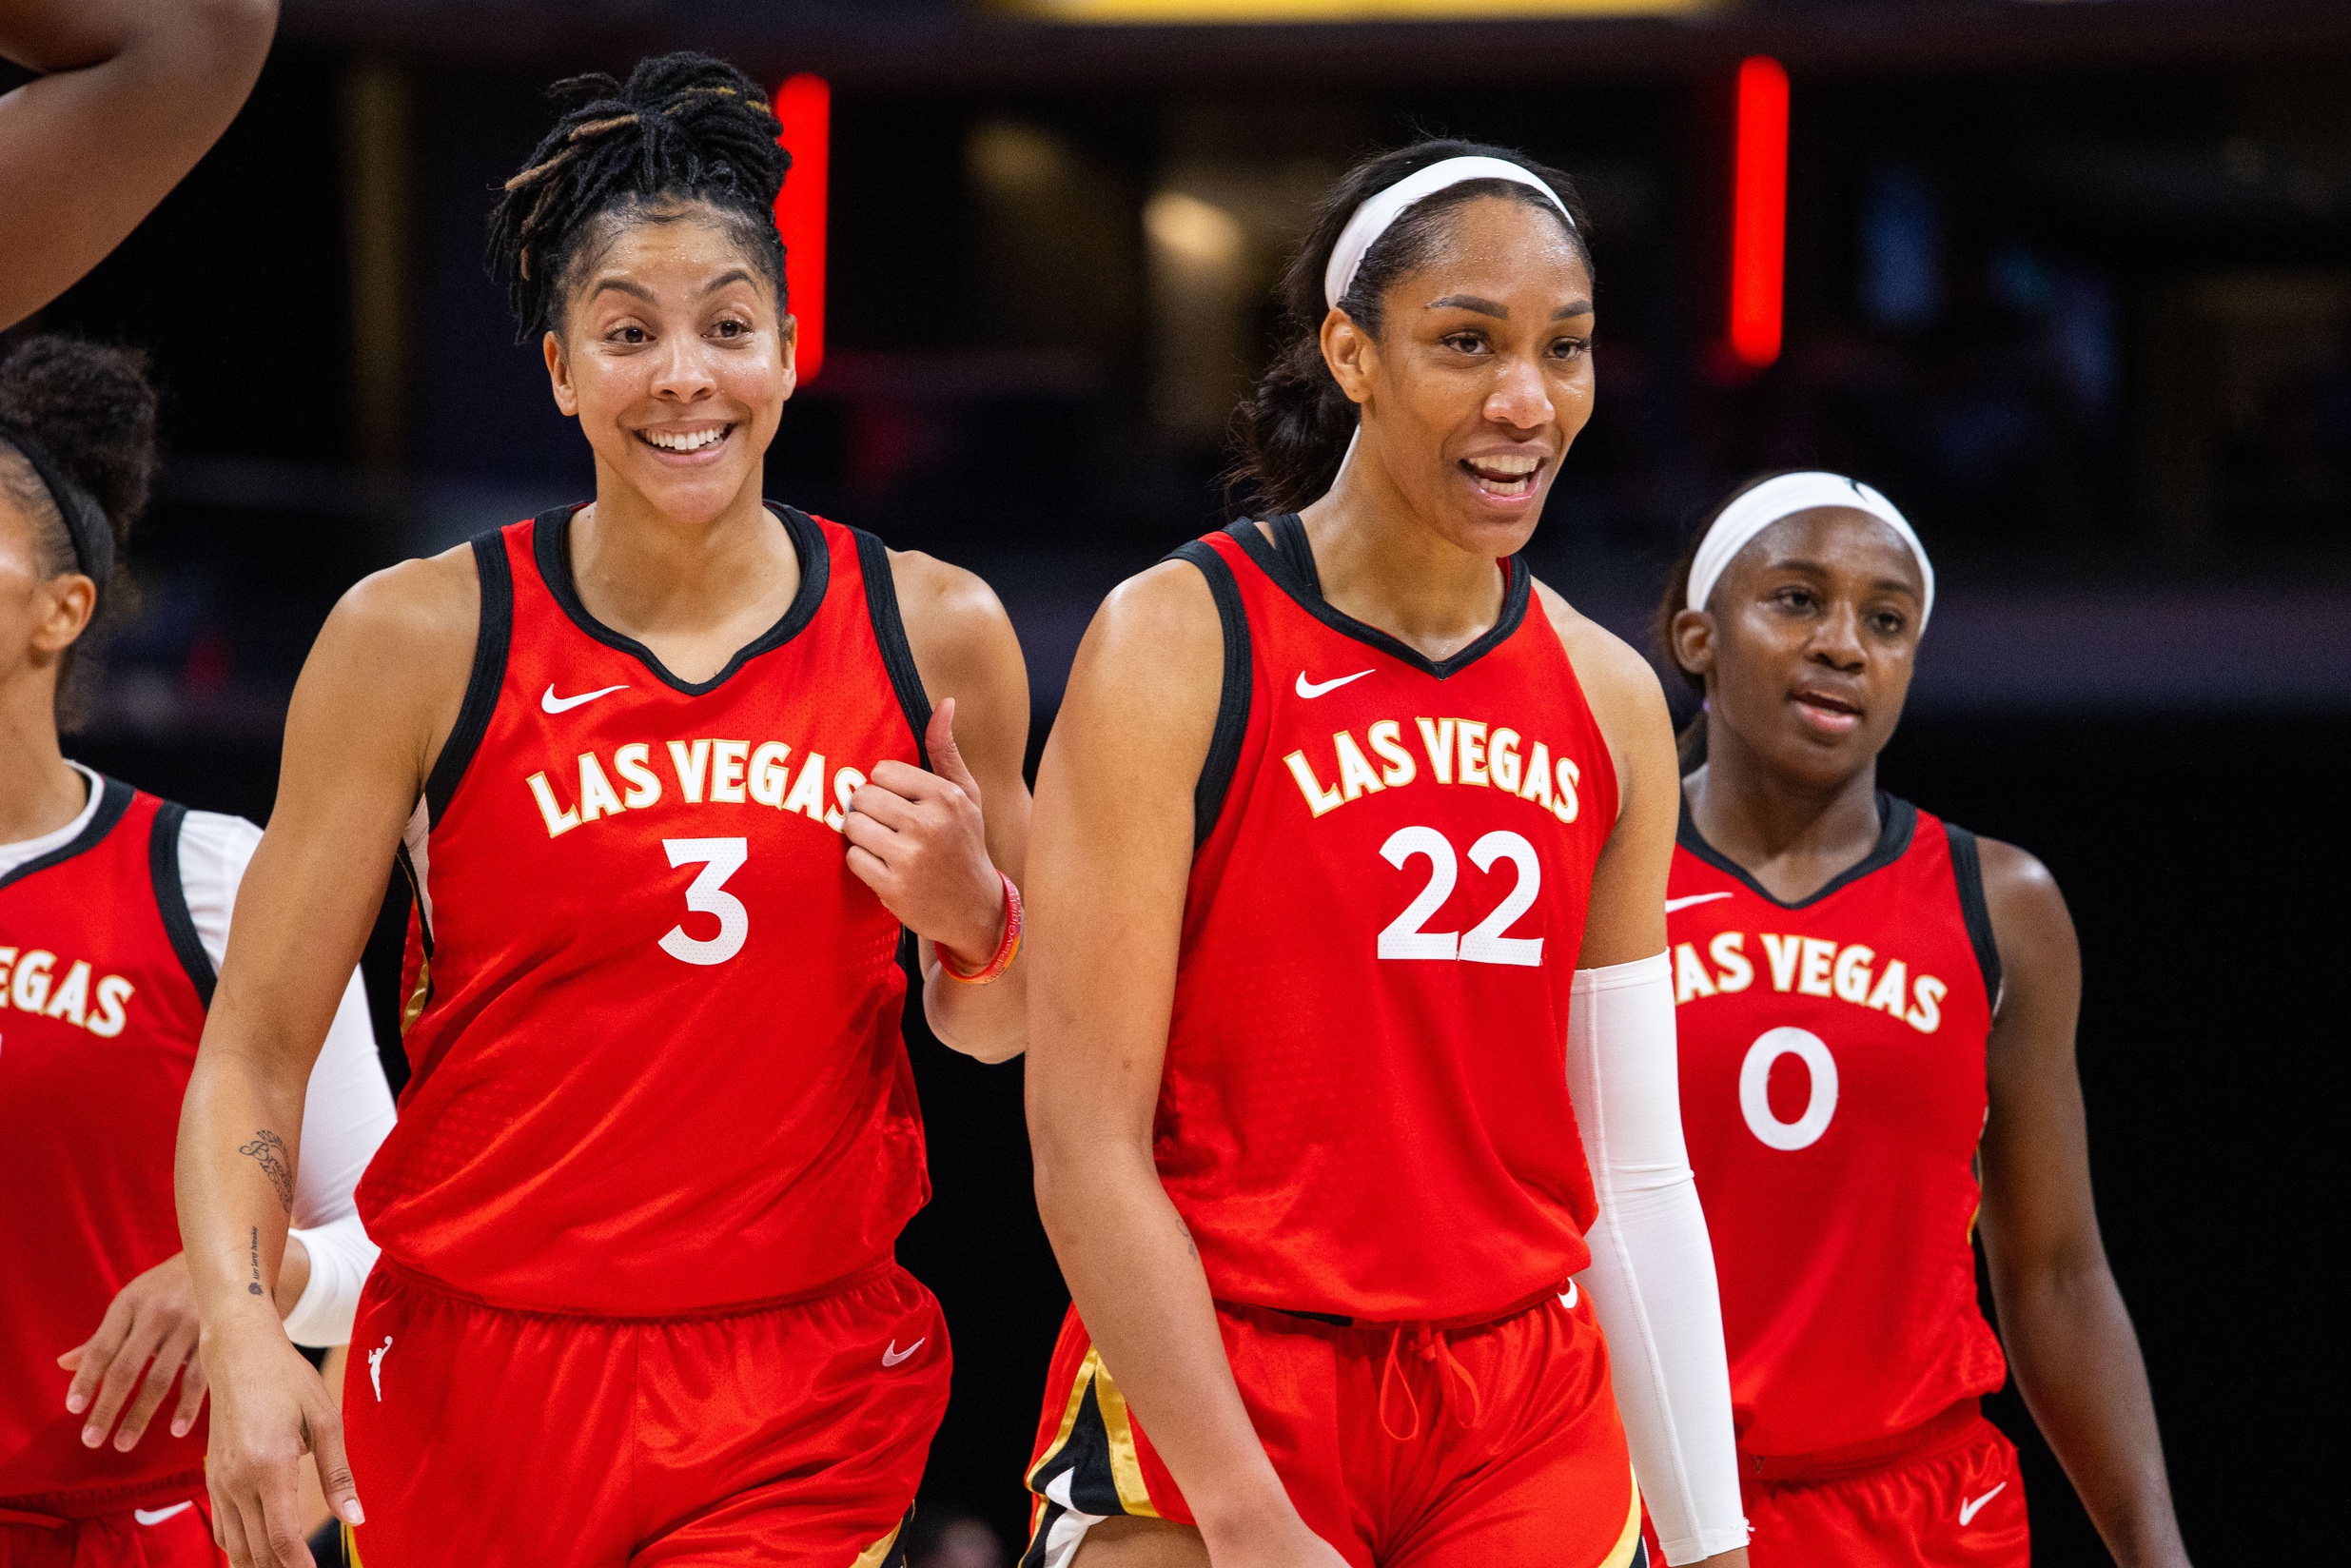 The WNBA Power Rankings start with the Las Vegas Aces